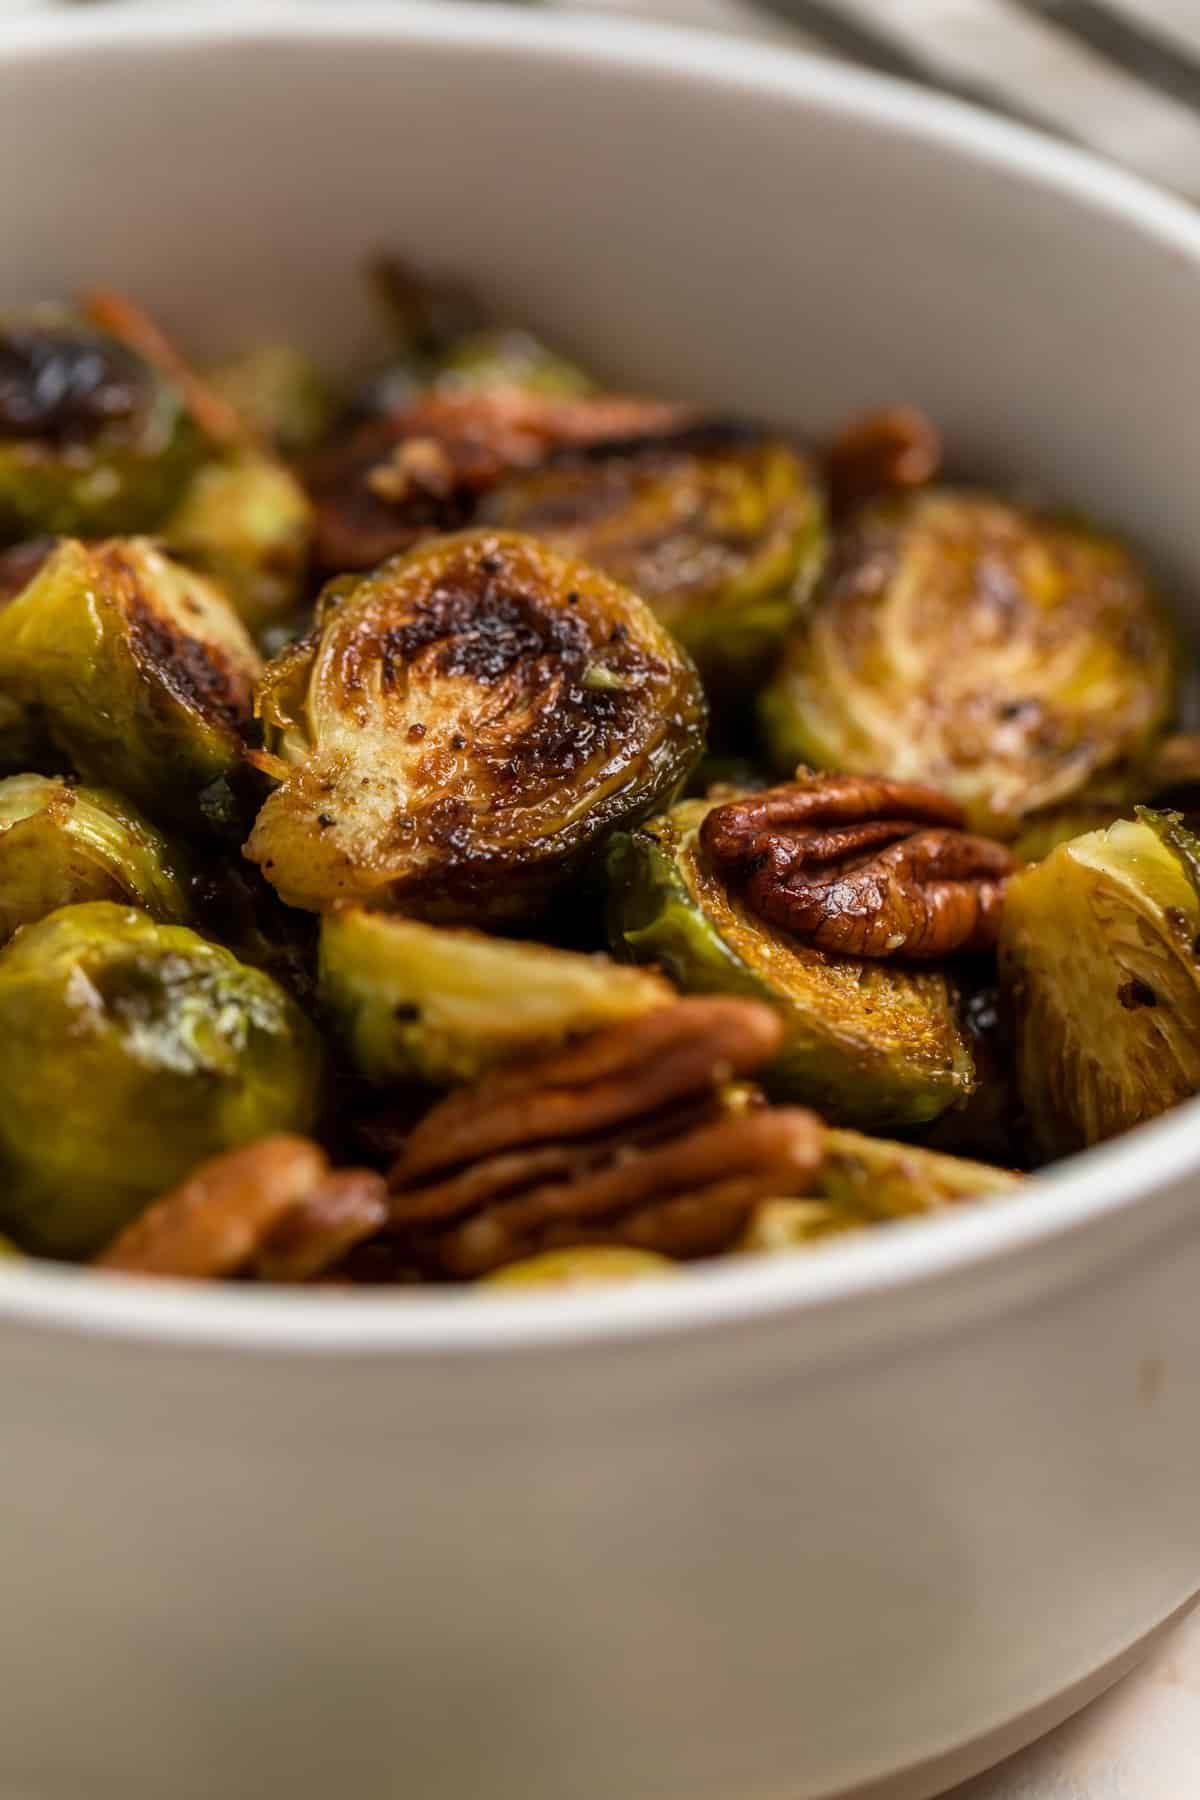 Dish with roasted brussels sprouts tossed in balsamic.